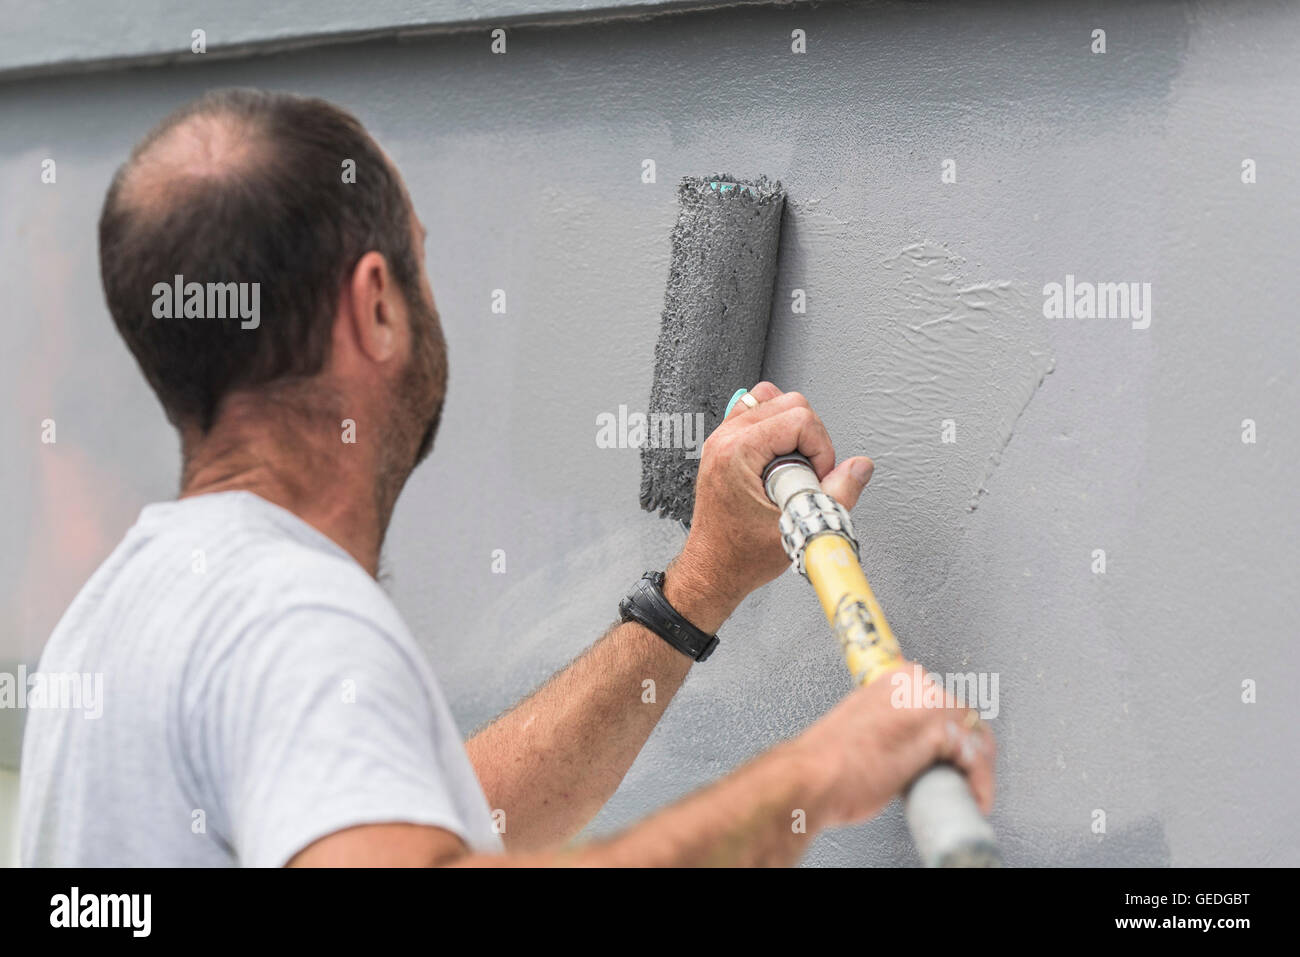 A painter and decorator using a roller to paint the exterior wall of a house. Stock Photo